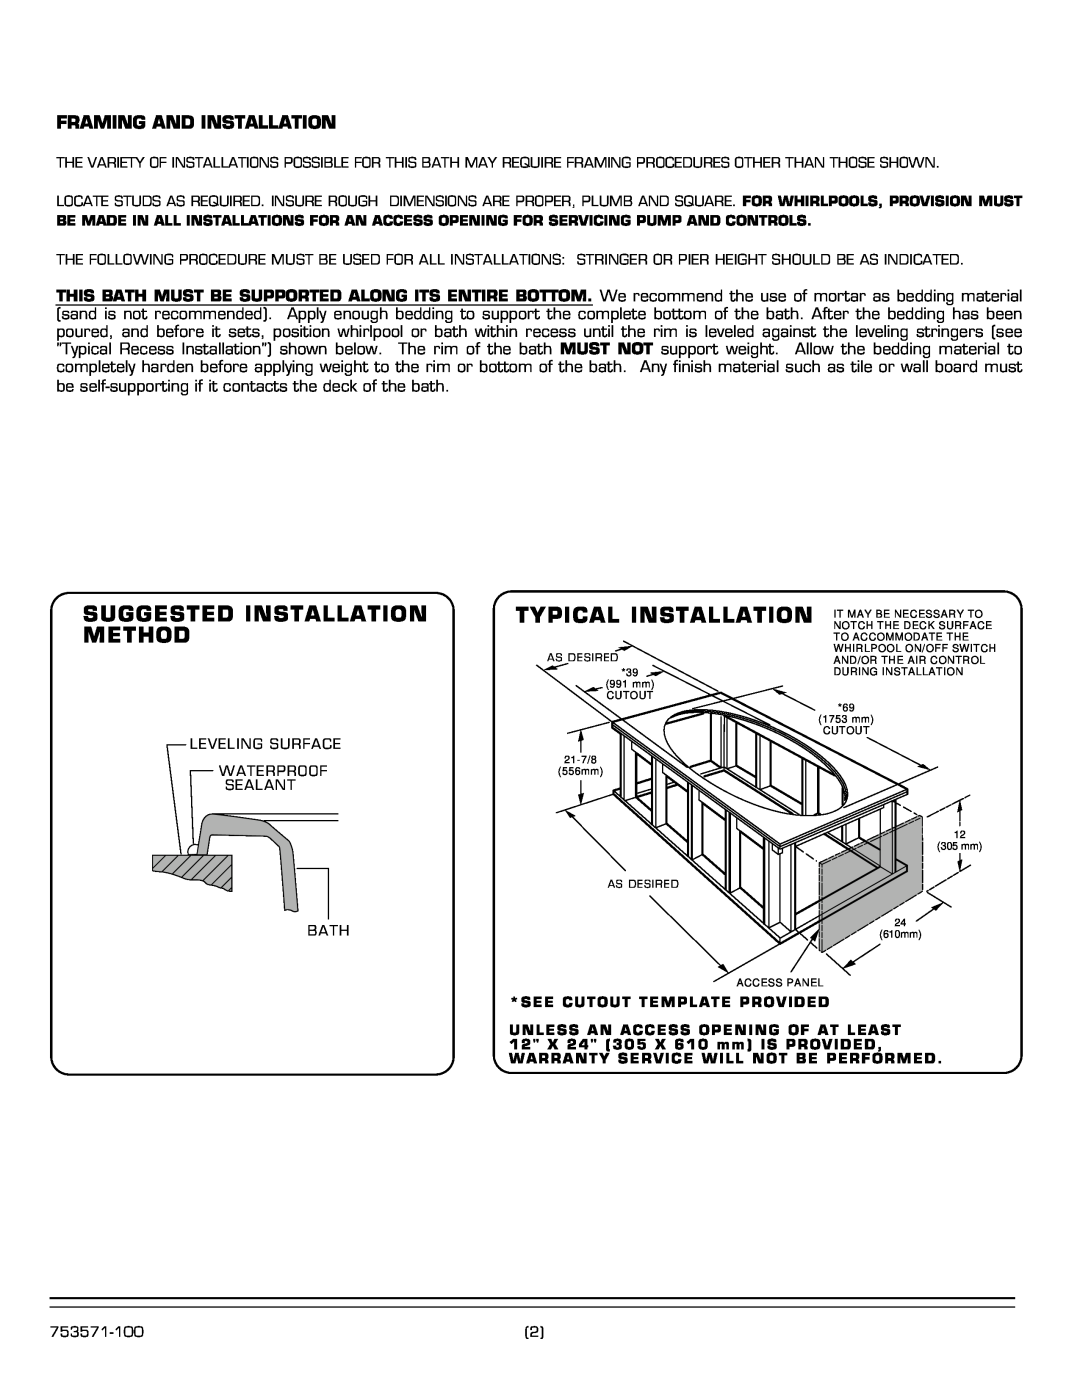 American Standard 1742 Series Suggested Installation Method, Typical Installation, Framing And Installation 